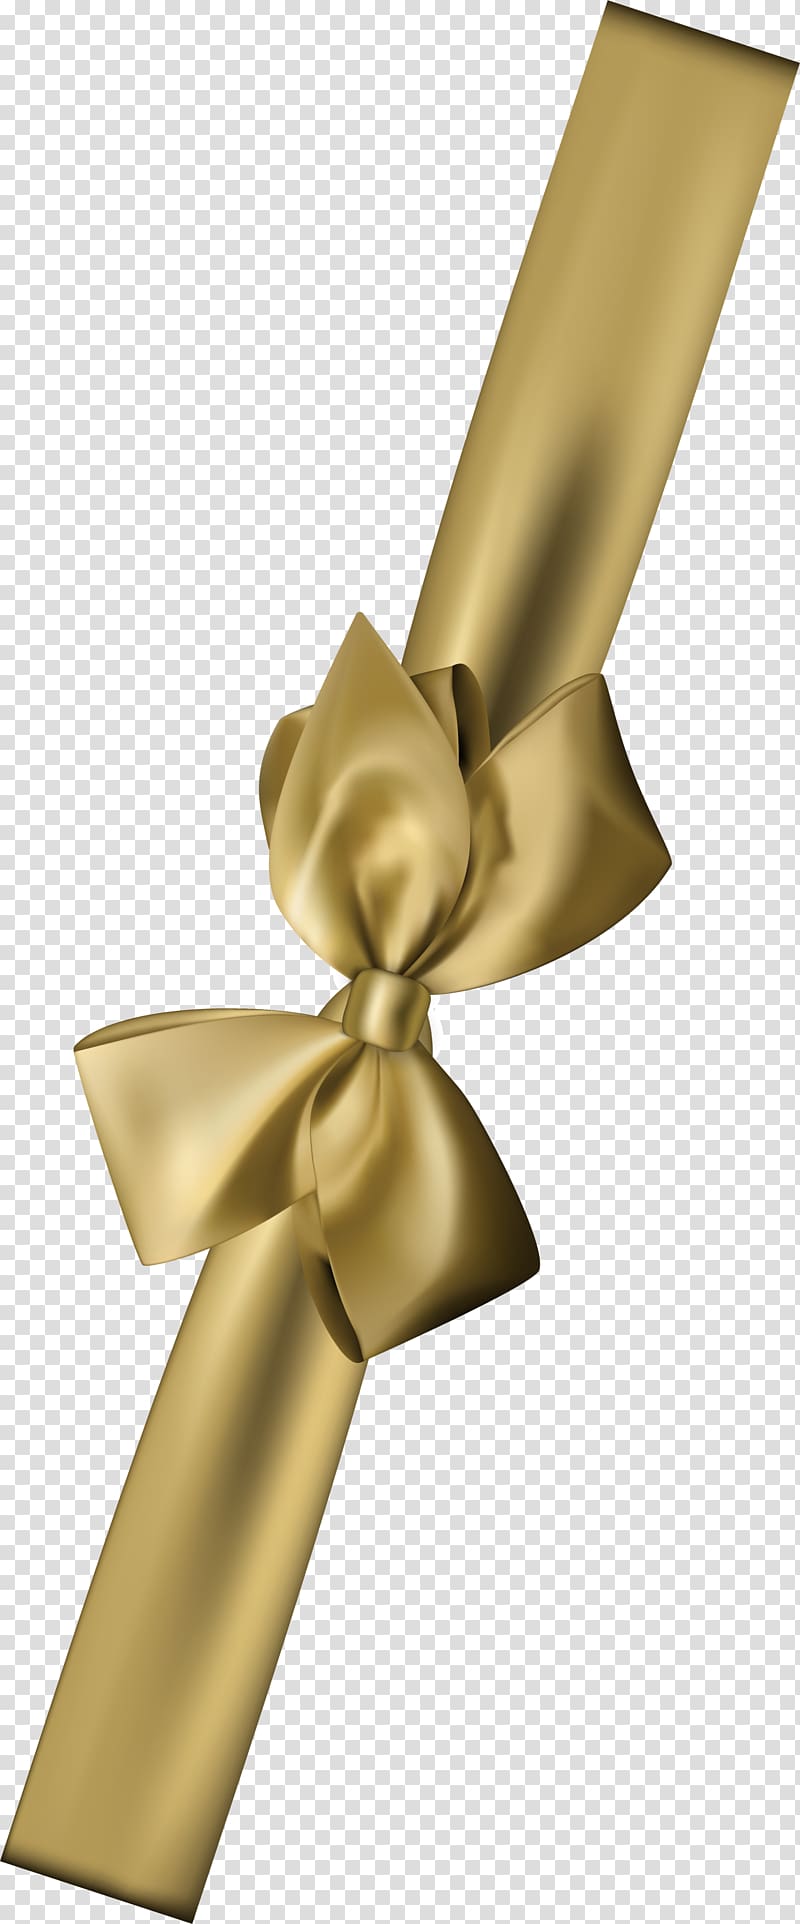 Shoelace knot Ribbon Bow tie, Simple bow tie in coffee transparent background PNG clipart